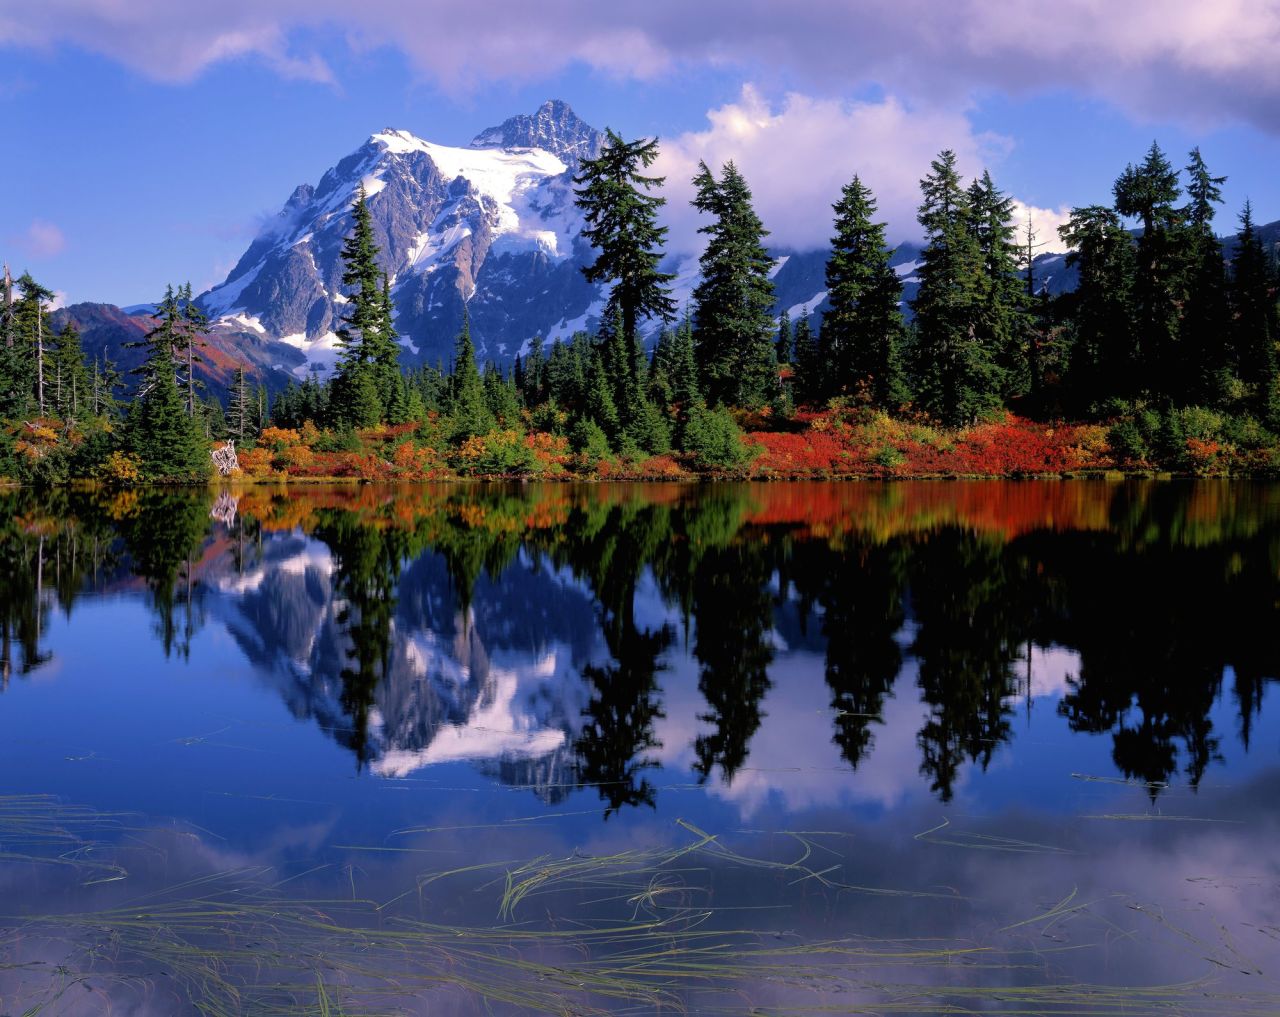 In spite of its beauty, North Cascades National Park attracted just 24,000 visitors in 2014.
